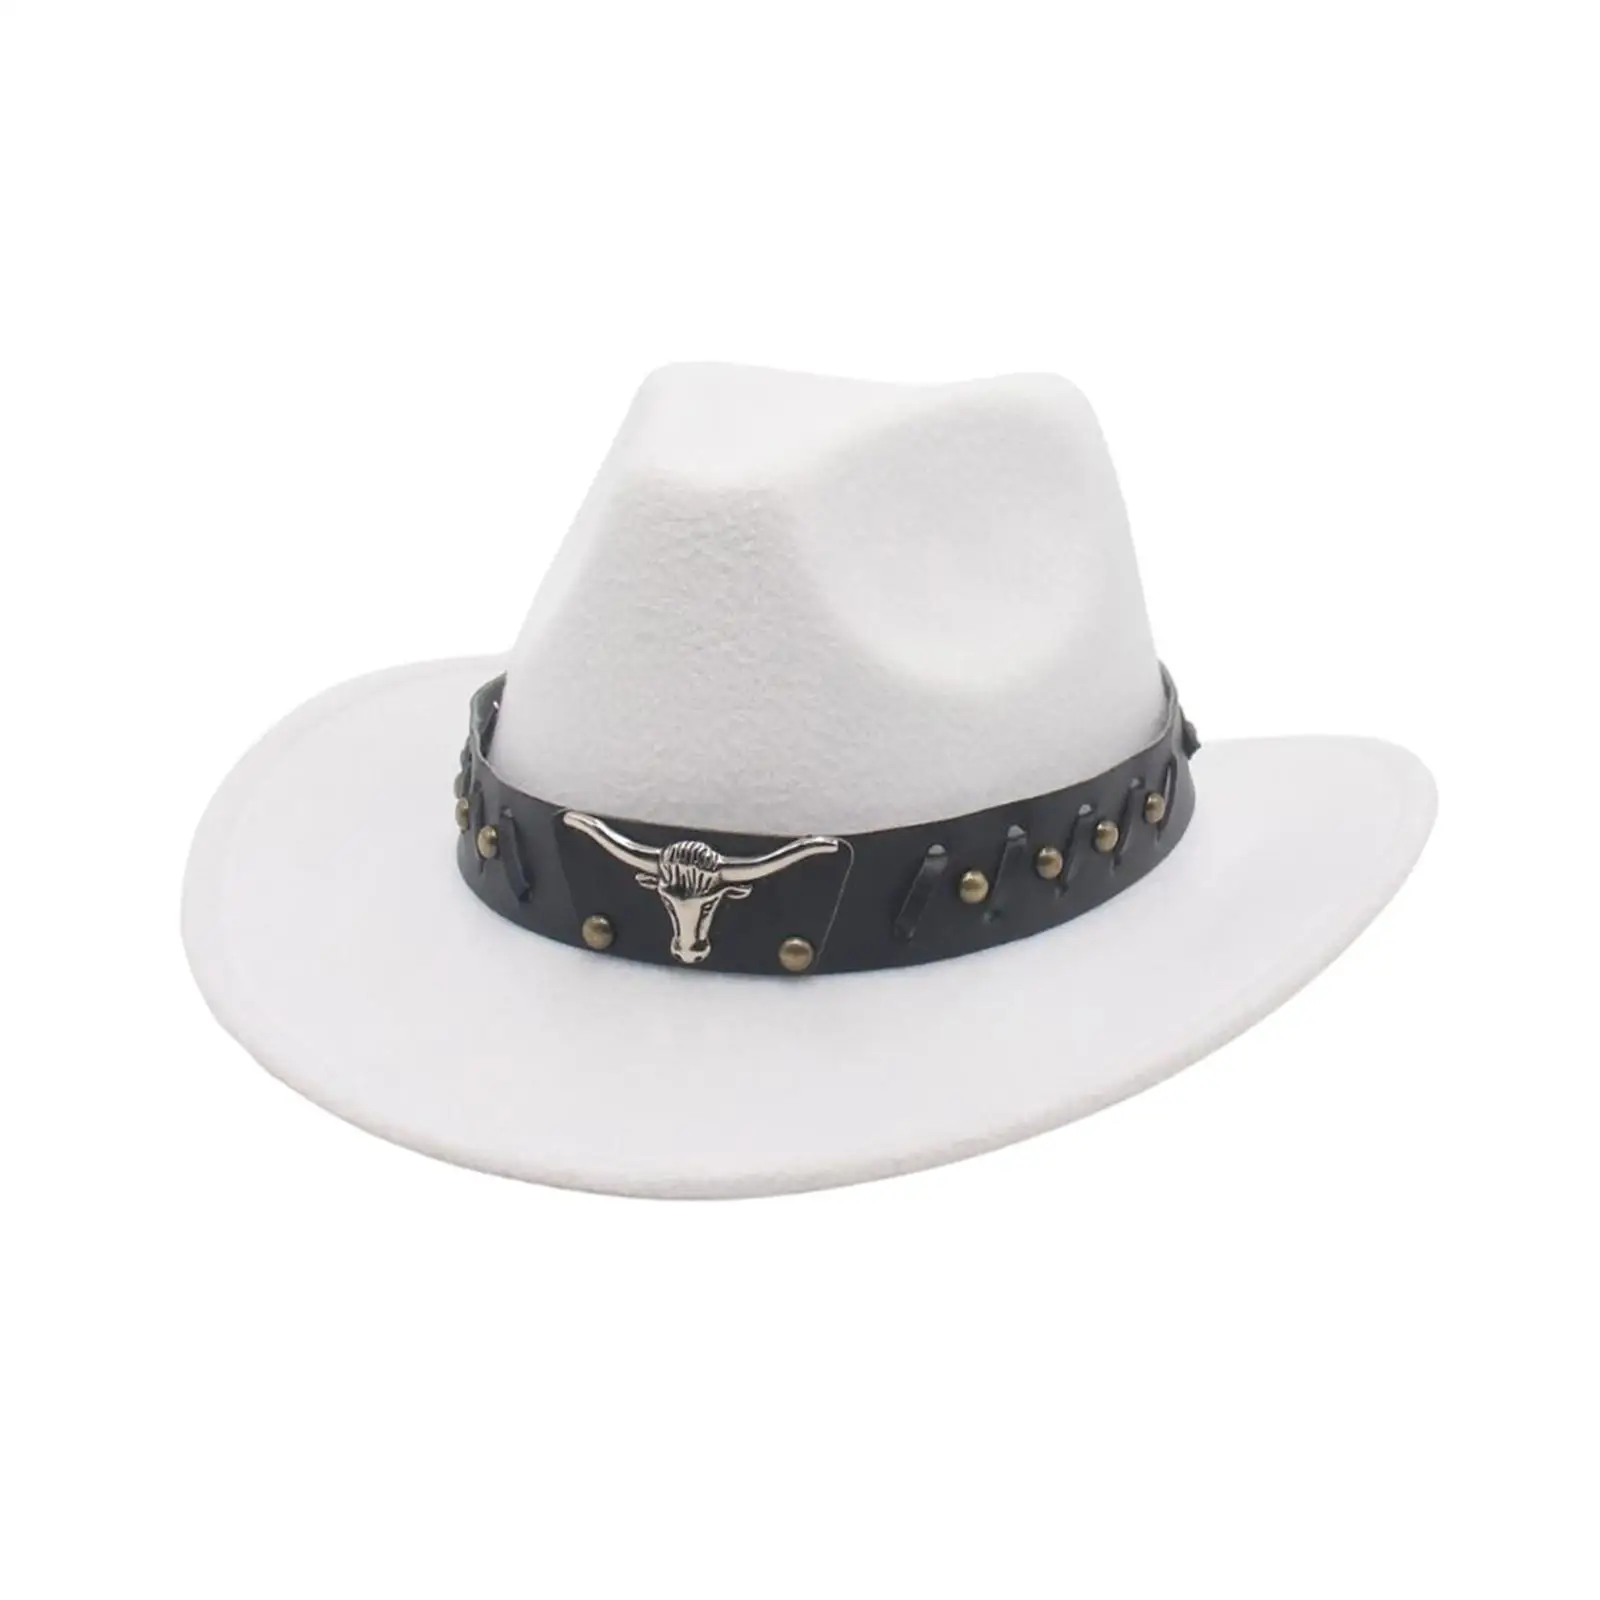 Western Cowboy Hat Cosplay Classic Versatile Women Photo Props Cowgirl Hat Sunhat for Autumn Party Gift Holiday Costume Hiking